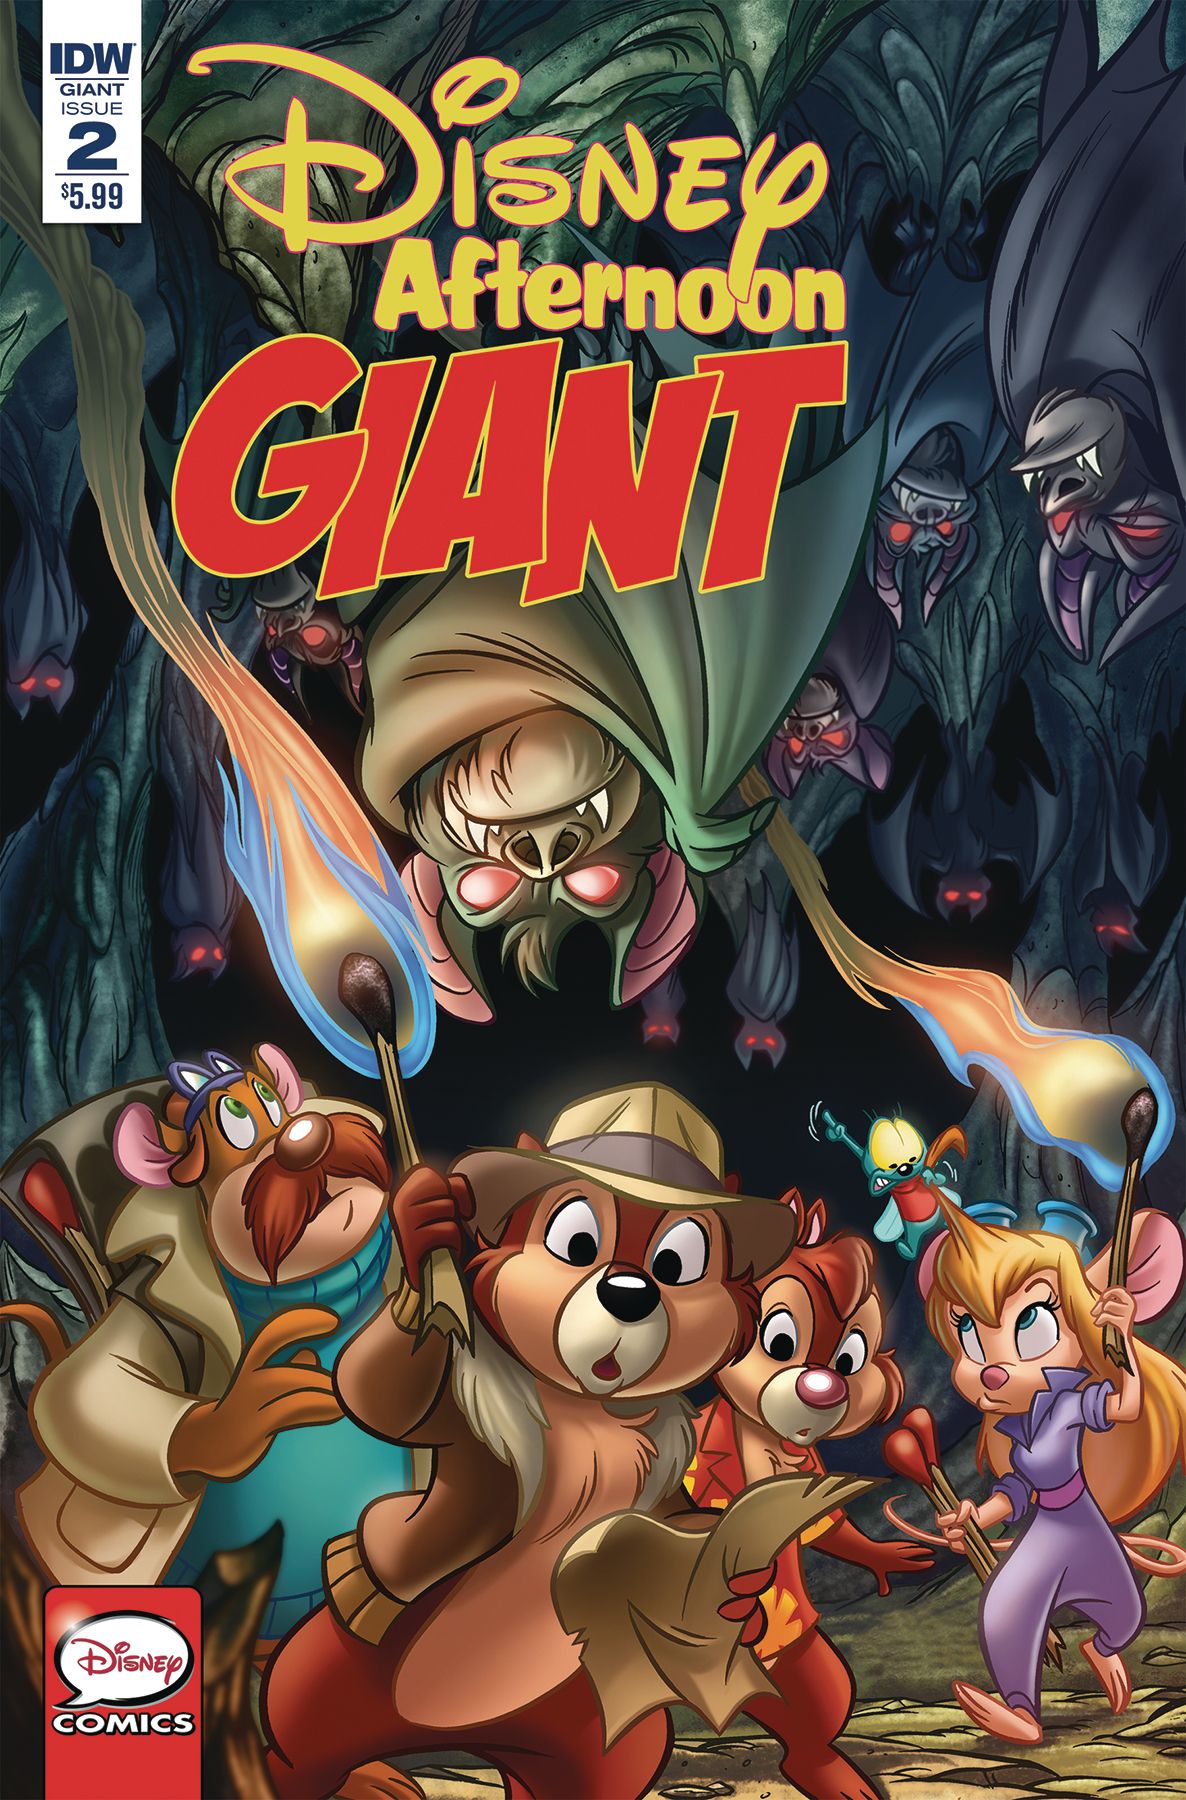 Disney Afternoon Giant #2 Comic